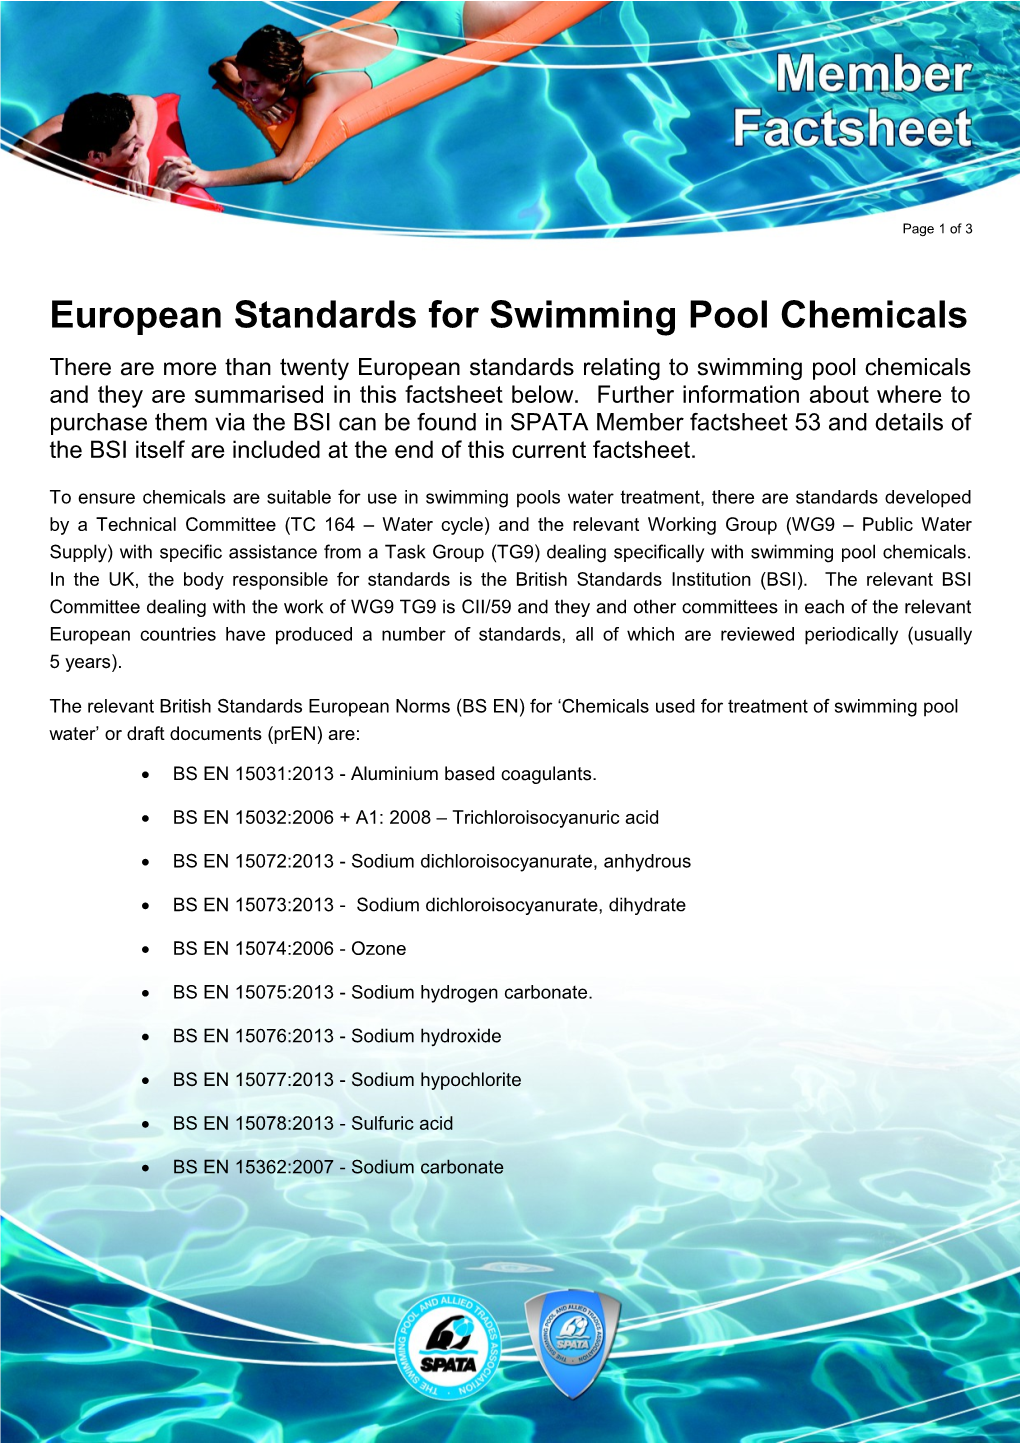 European Standards for Swimming Pool Chemicals